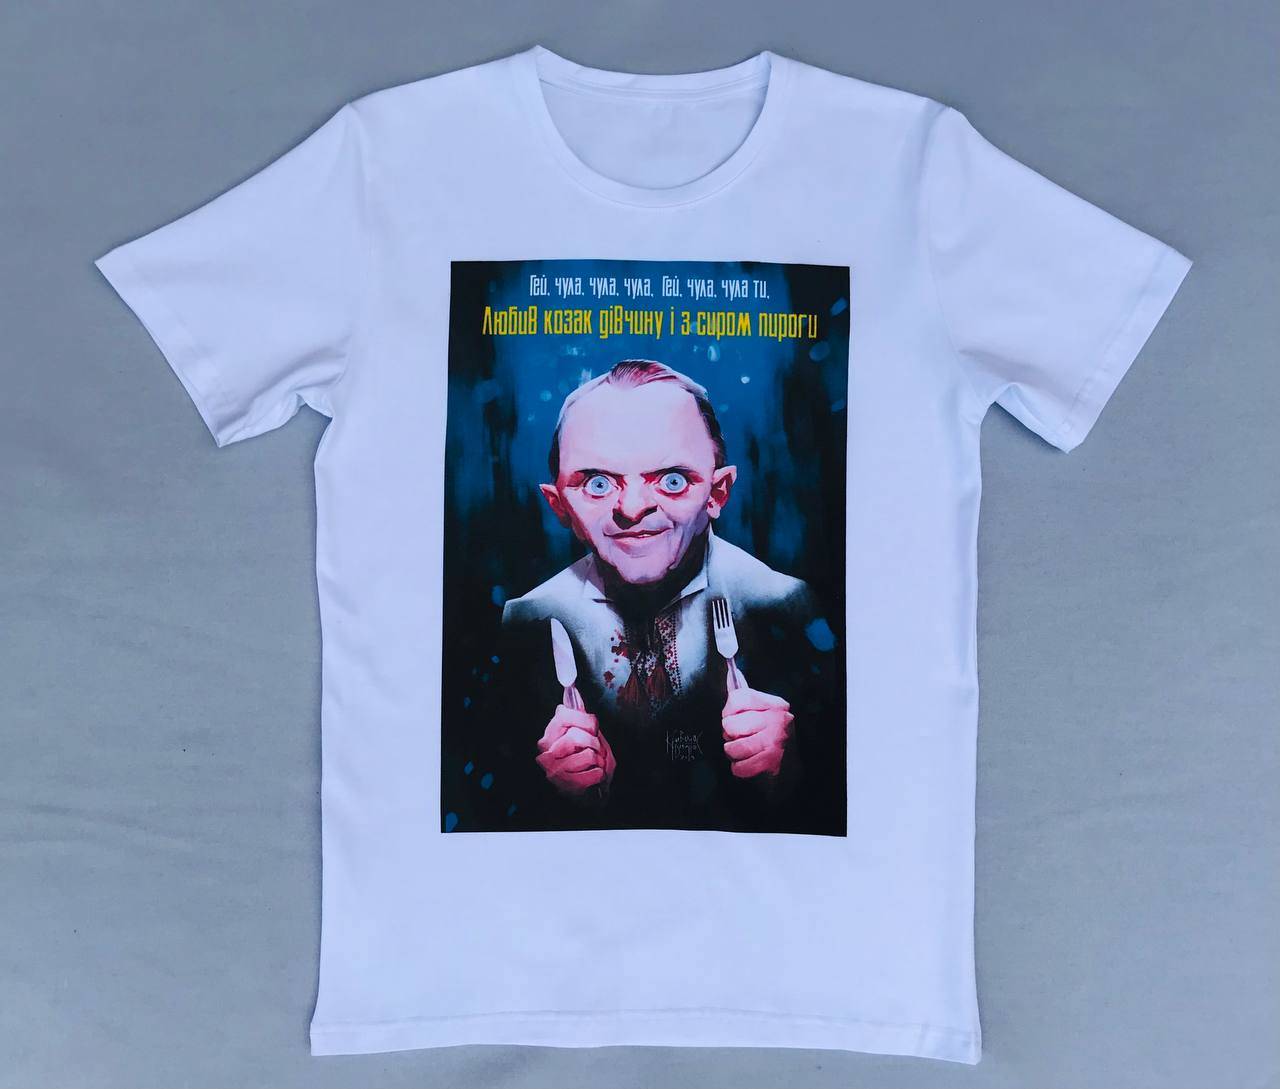 T-shirt with fan-art “The silence of the Lambs” by Dmitriy Krivonos